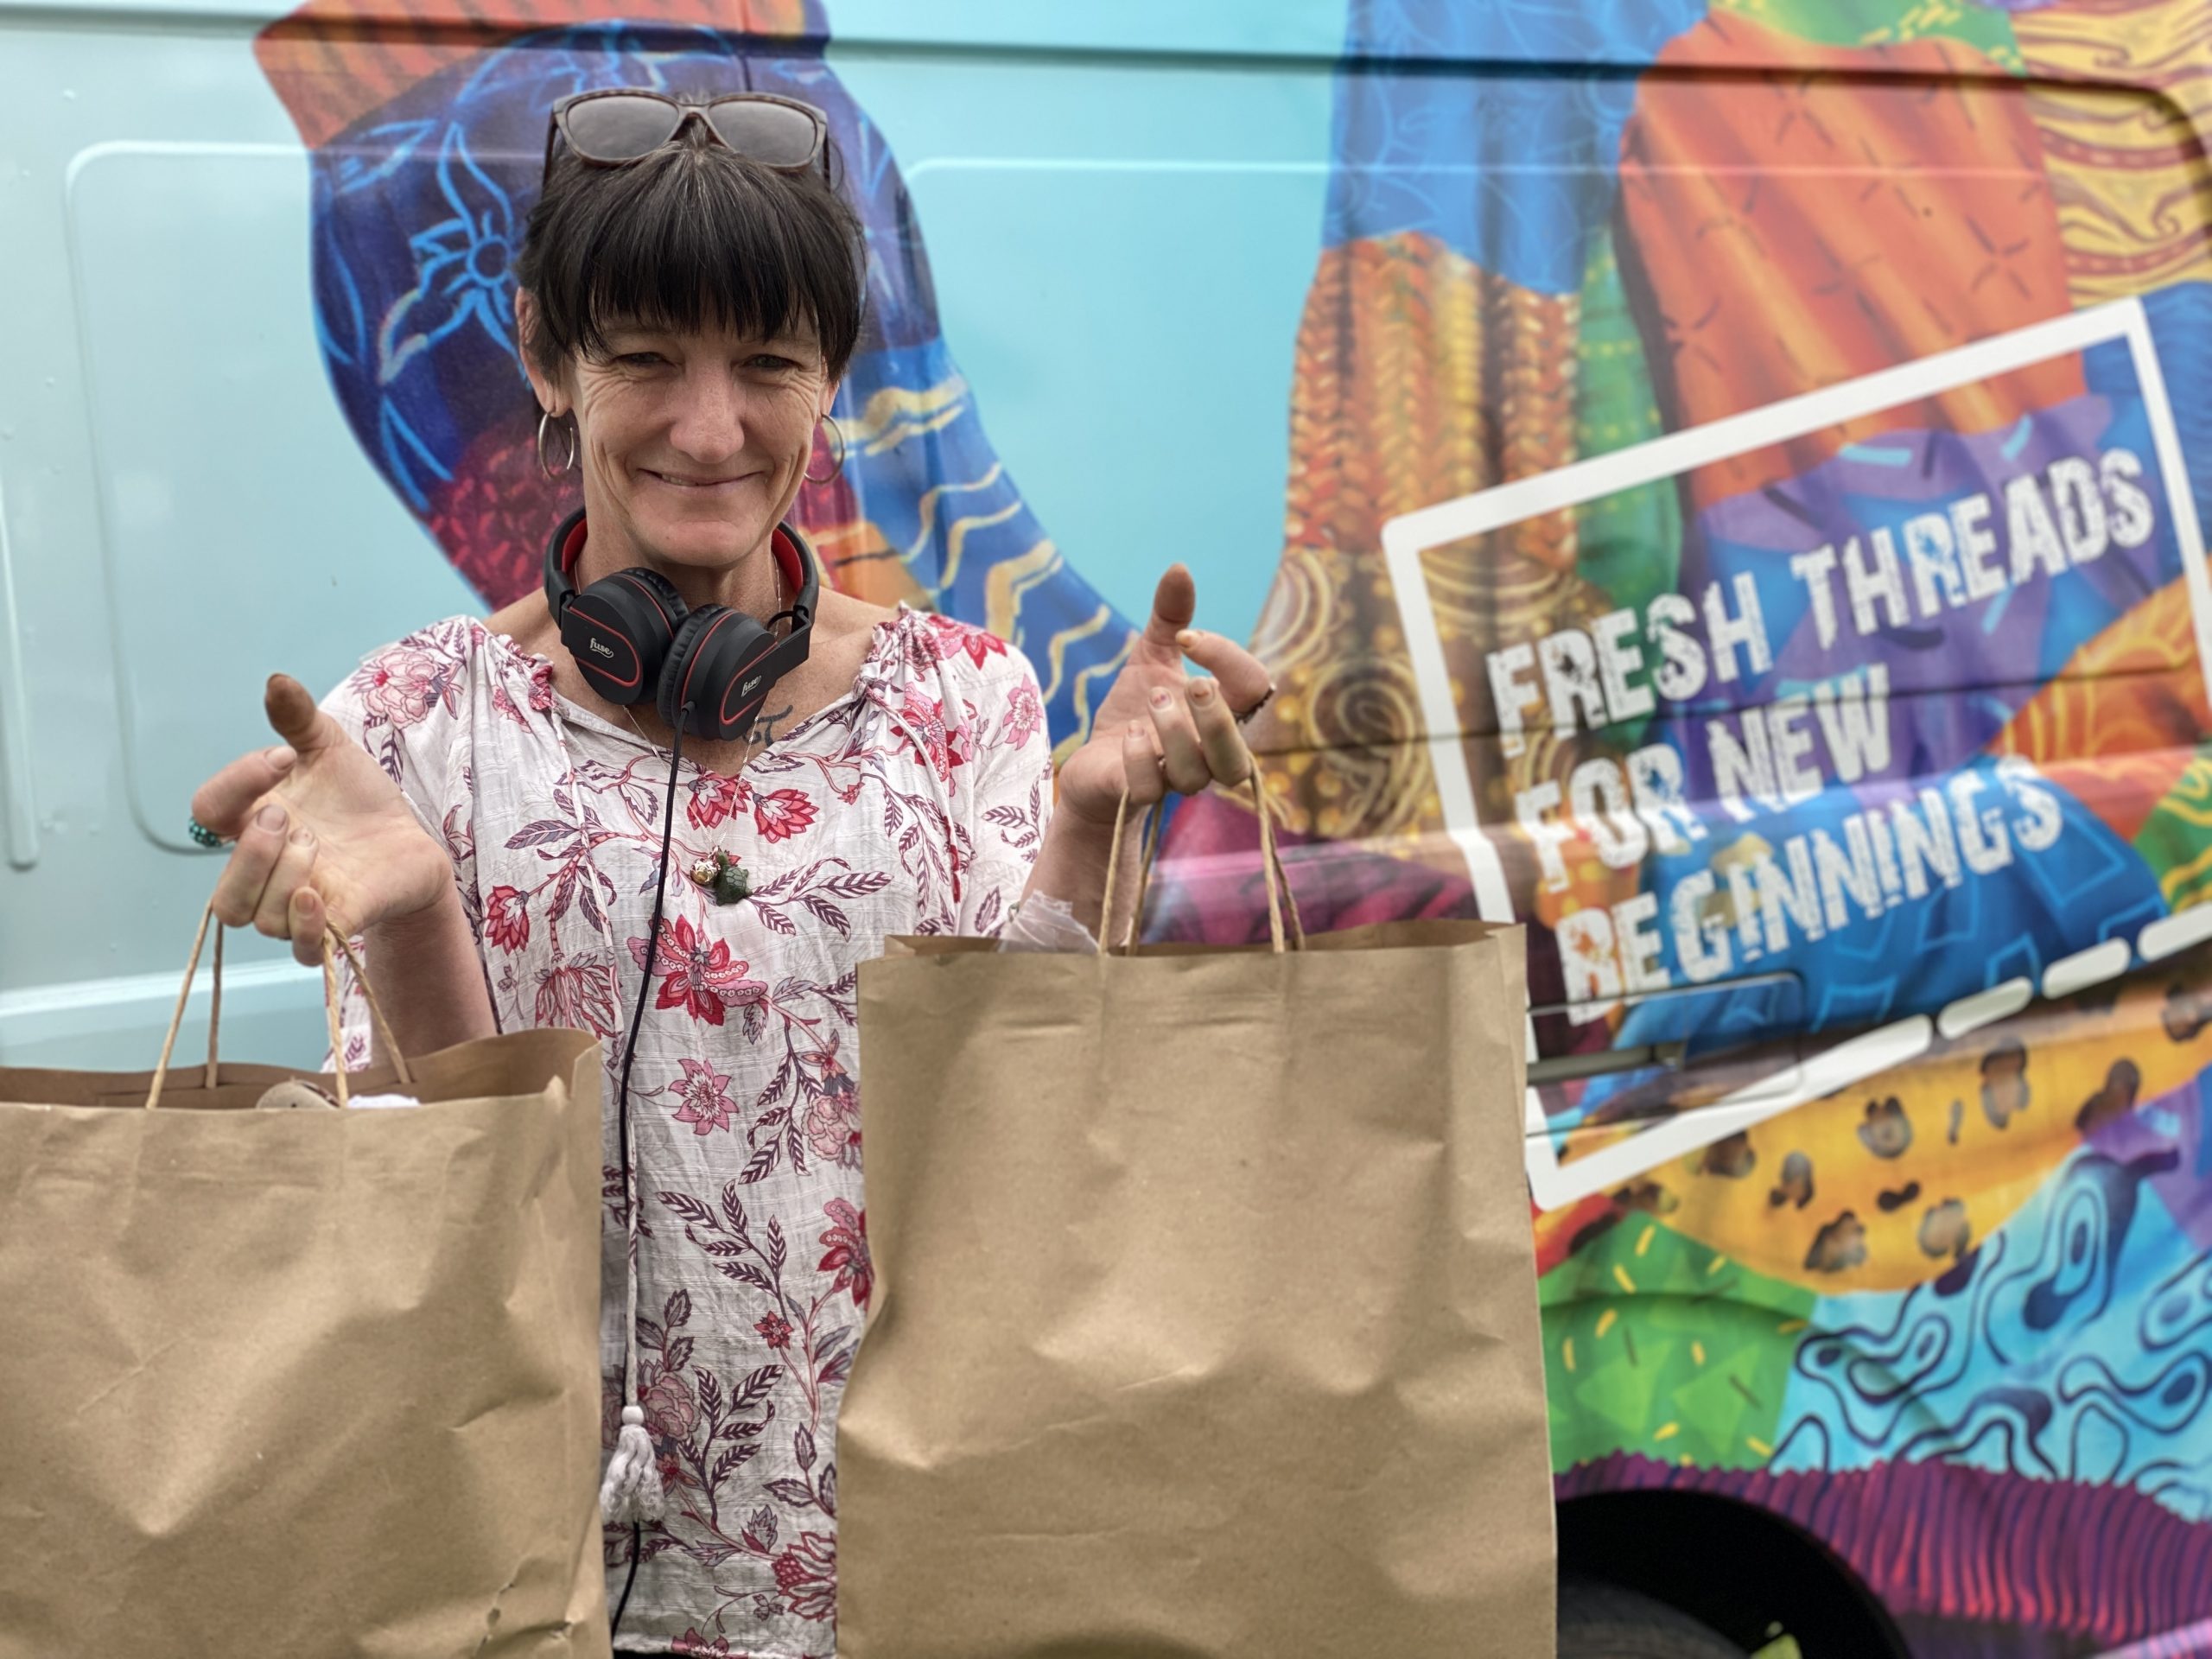 NEW LOOK: Kelly welcomed the opportunity to collect a new outfit at no cost when AnglicareSA and Thread Together’s mobile clothing van visited ac.care’s Mount Gambier Community Centre last month.